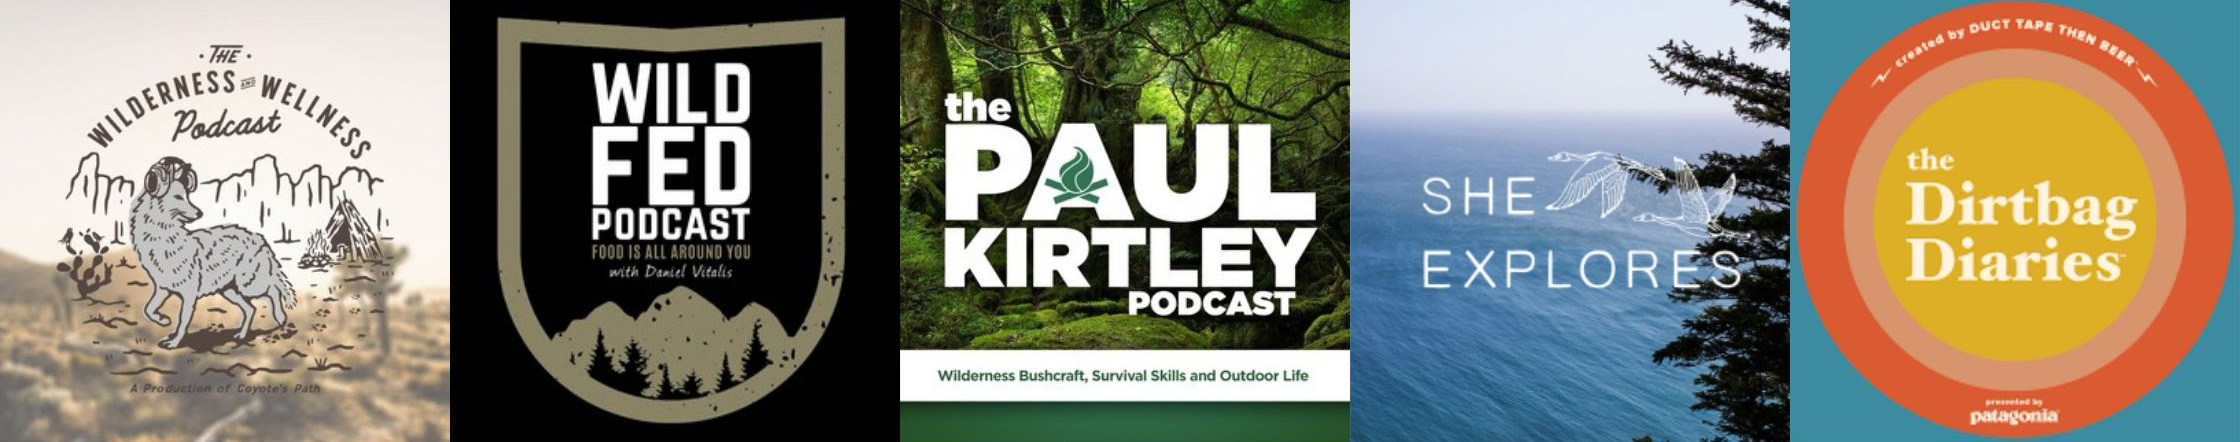 Check out these great outdoor adventure podcasts: Wilderness Wellness, Wild Fed, Paul Kirtley, She Explores, and Dirtbag Diaries.